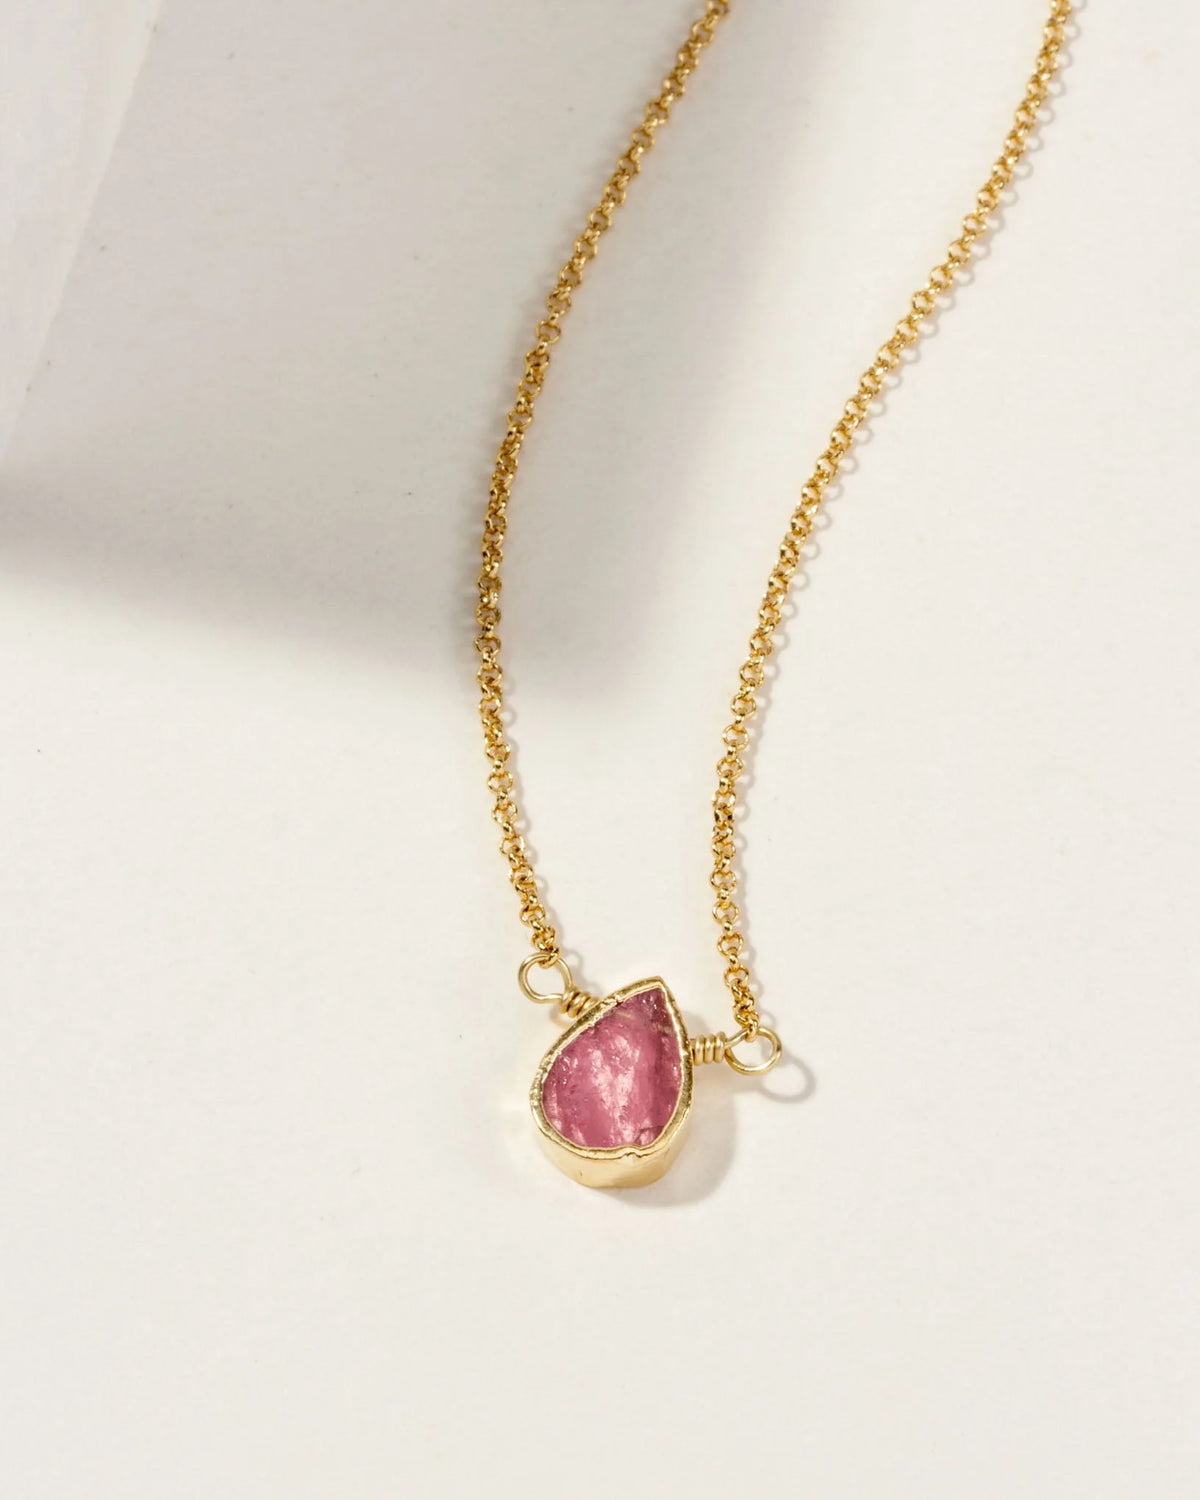 delicate gemstone necklace in 14kt gold plated brass and tourmaline gemstone by luna norte jewelry